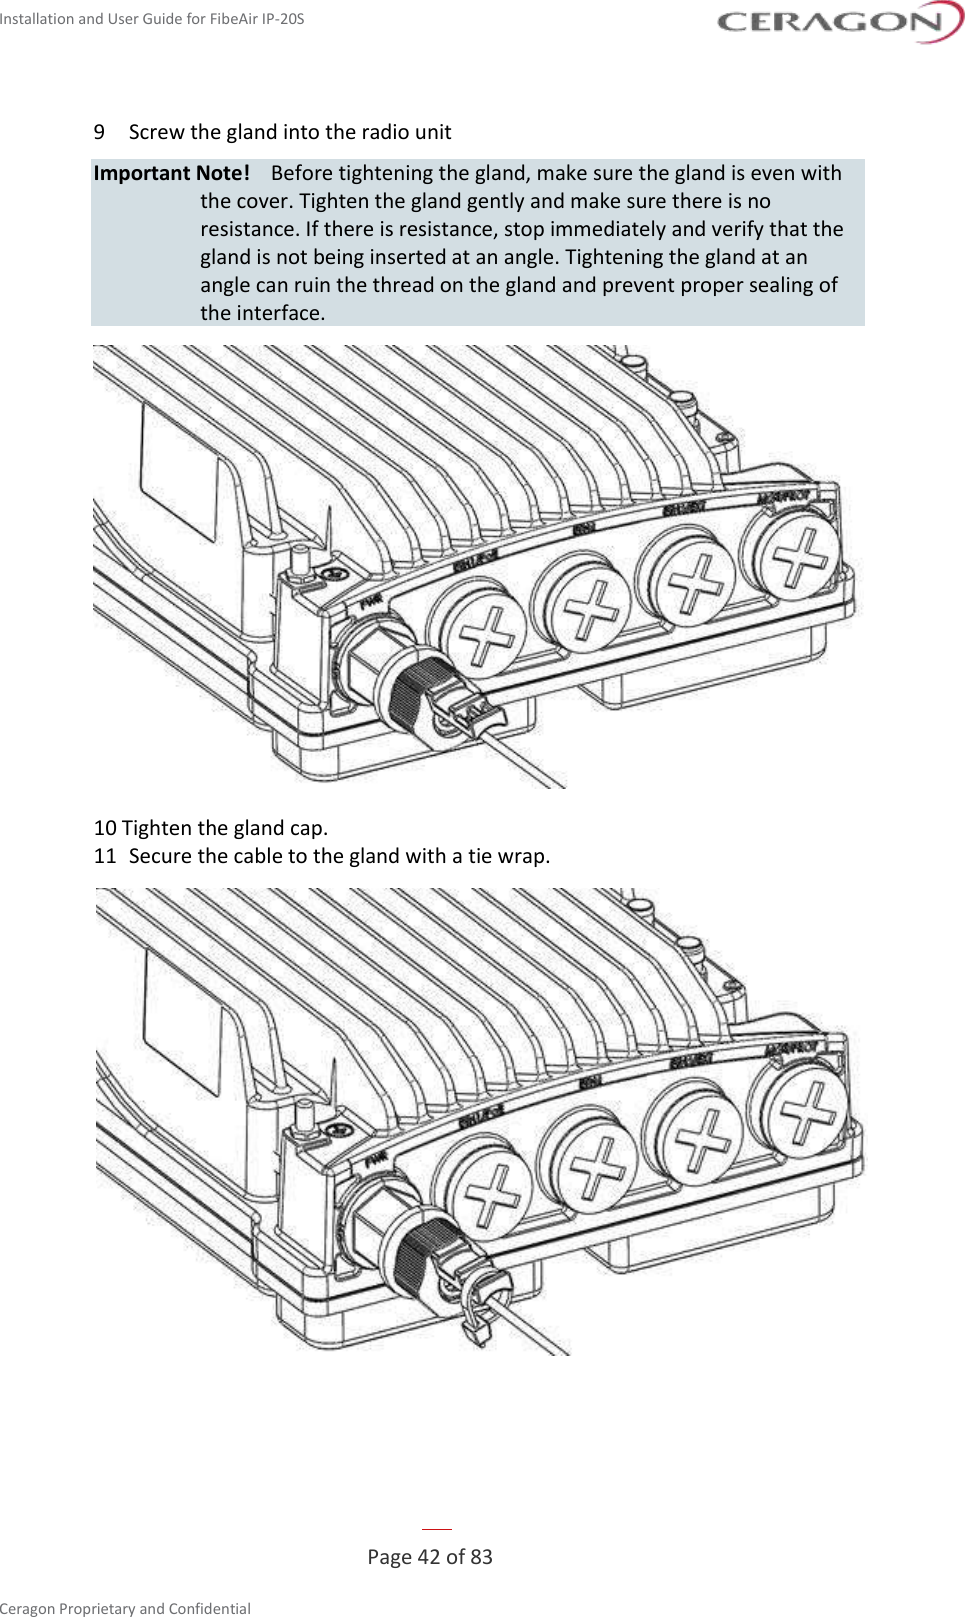 Installation and User Guide for FibeAir IP-20S   Page 42 of 83  Ceragon Proprietary and Confidential     9  Screw the gland into the radio unit Important Note!  Before tightening the gland, make sure the gland is even with the cover. Tighten the gland gently and make sure there is no resistance. If there is resistance, stop immediately and verify that the gland is not being inserted at an angle. Tightening the gland at an angle can ruin the thread on the gland and prevent proper sealing of the interface.  10 Tighten the gland cap. 11  Secure the cable to the gland with a tie wrap.  